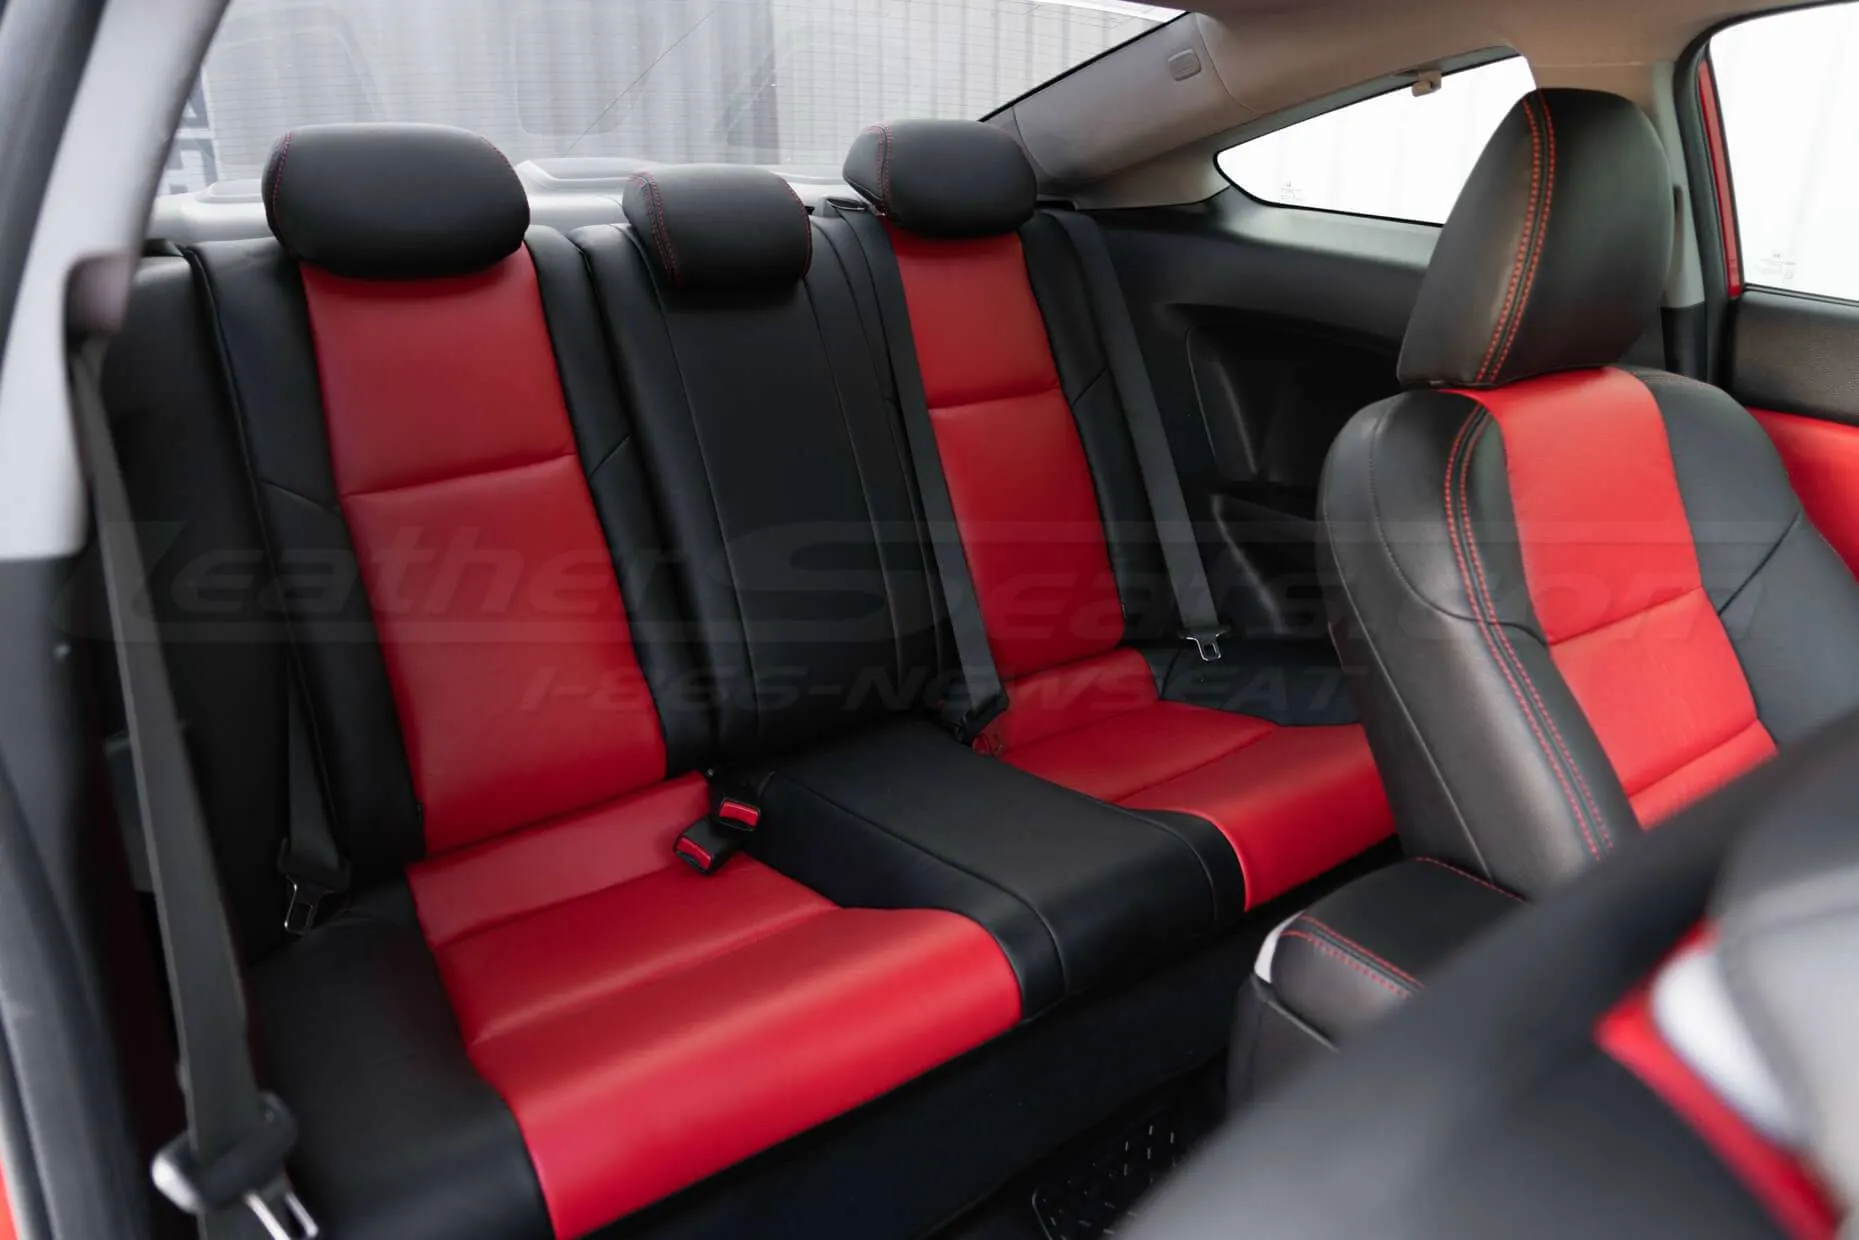 Honda Civic installed leather kit - Black & Bright Red - Rear seats from passenger side